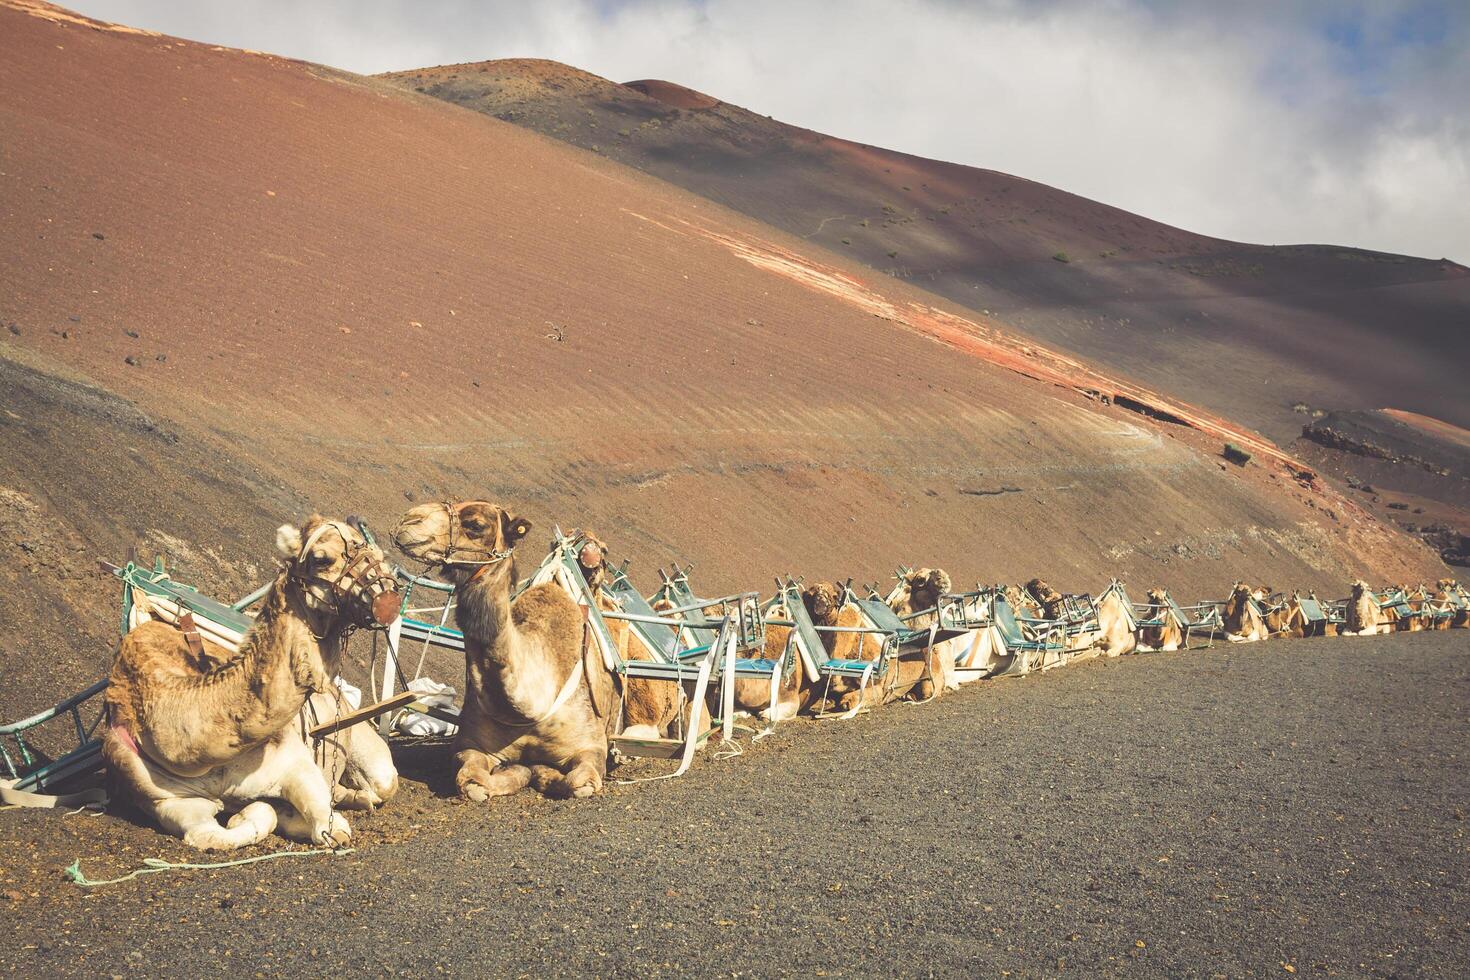 Caravan of camels in the desert on Lanzarote in the Canary Islands. Spain photo